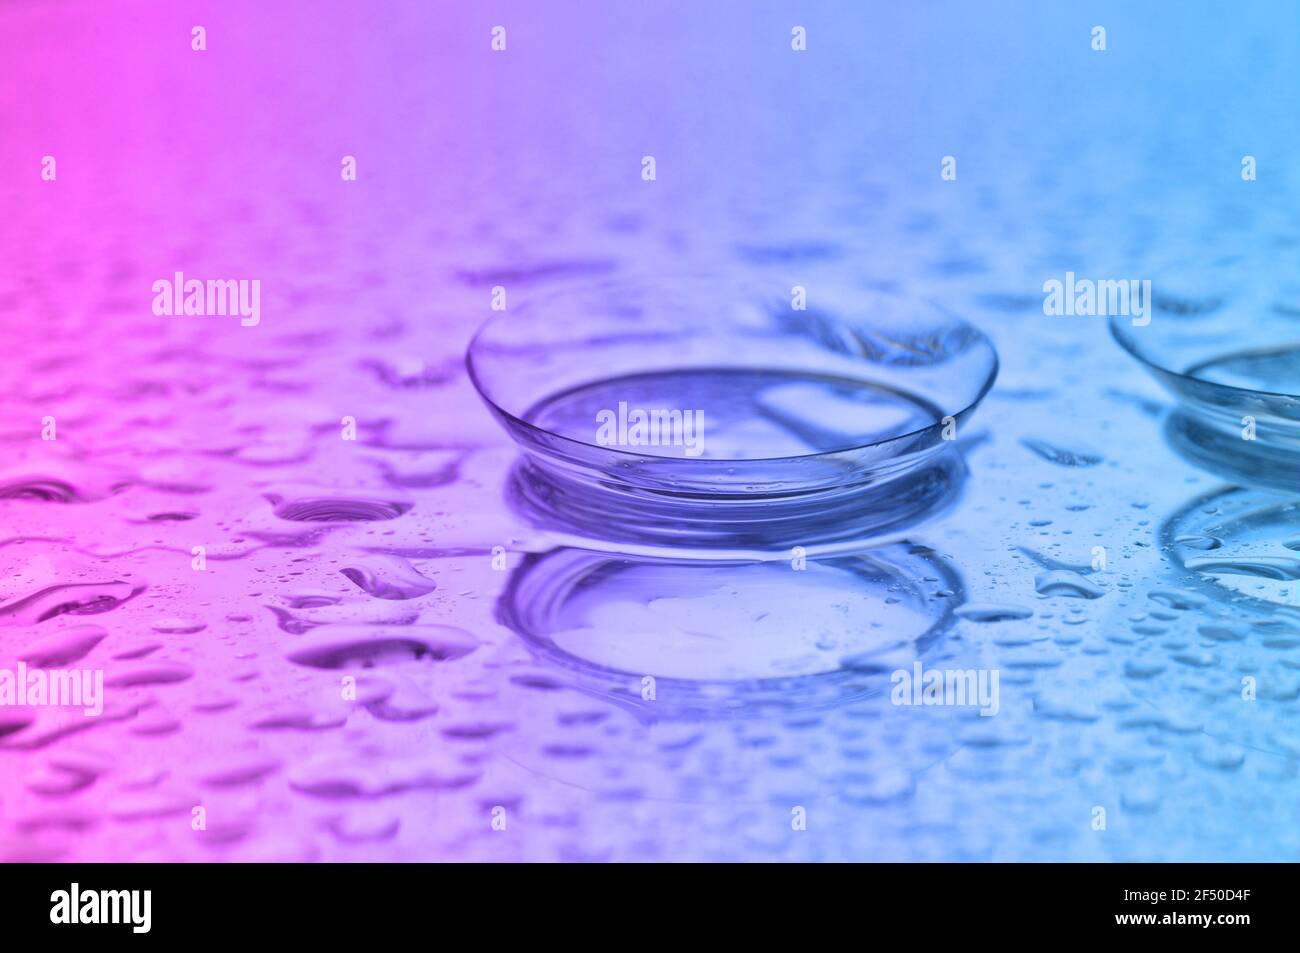 Contact lenses, on pink-blue background. Two contact lenses with water drops on pink-blue background. Stock Photo